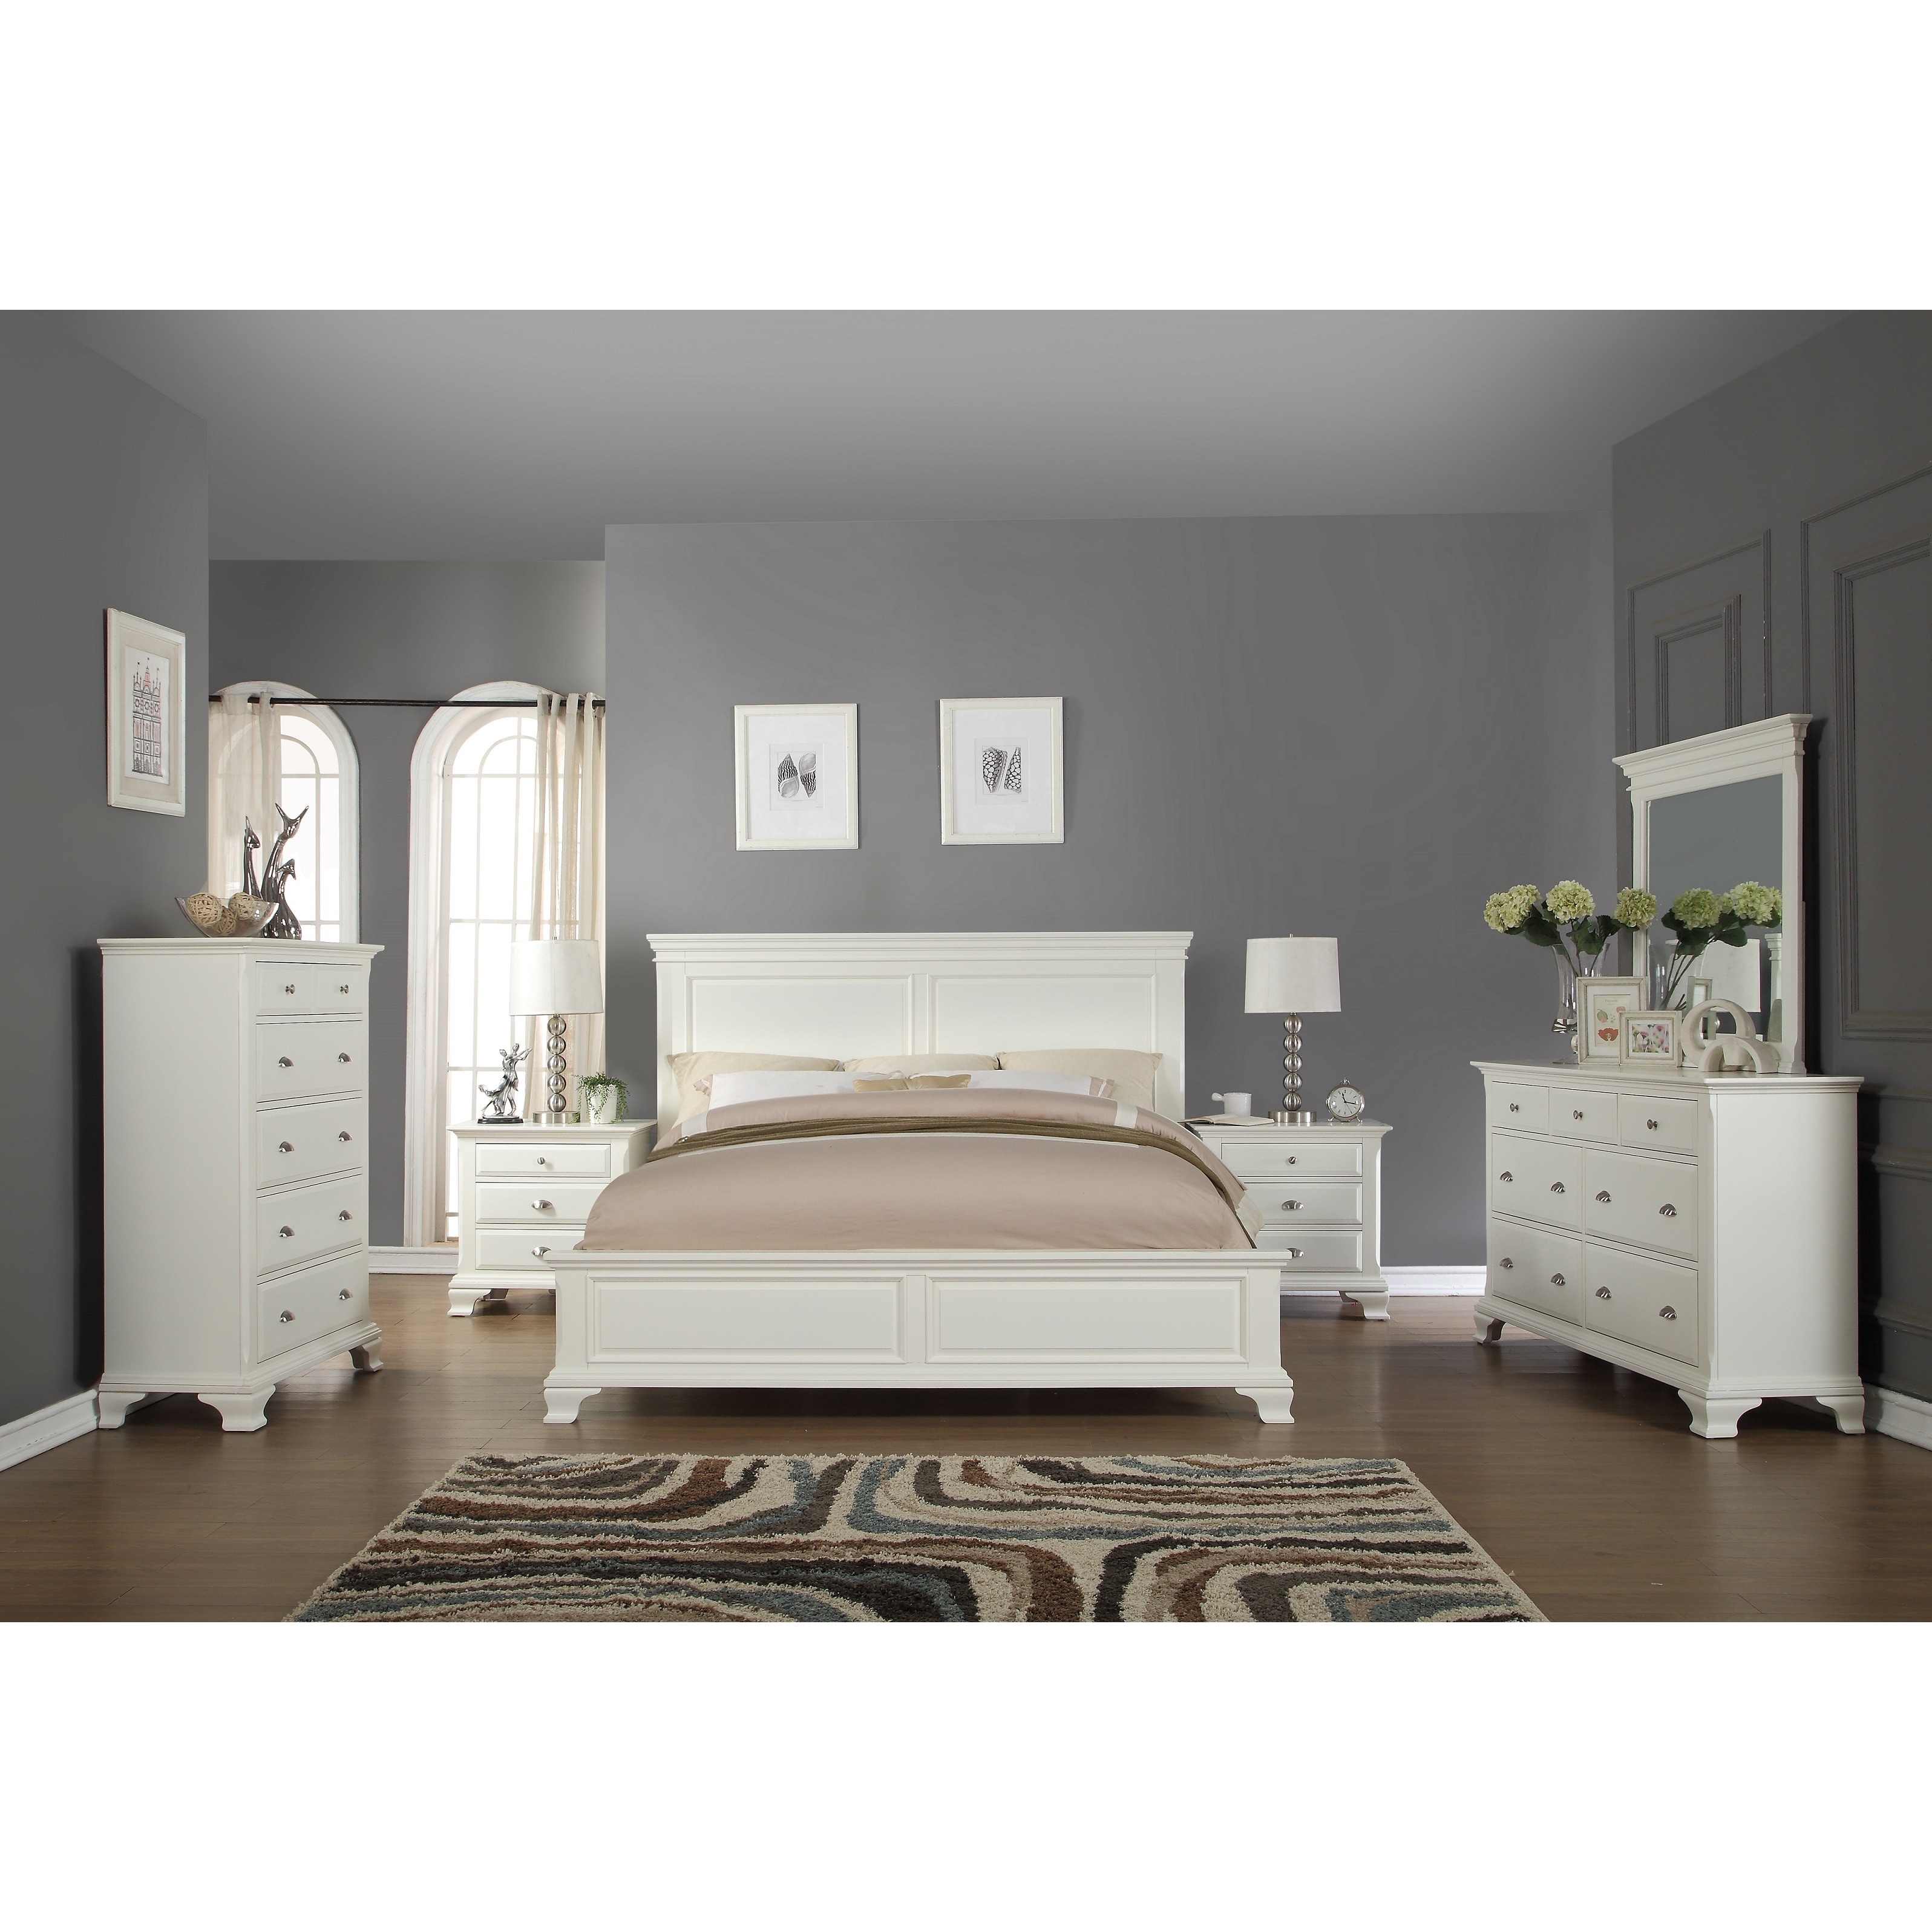 Laveno 012 White Wood Bedroom Furniture Set Includes King Bed Dresser Mirror 2 Night Stands And Chest